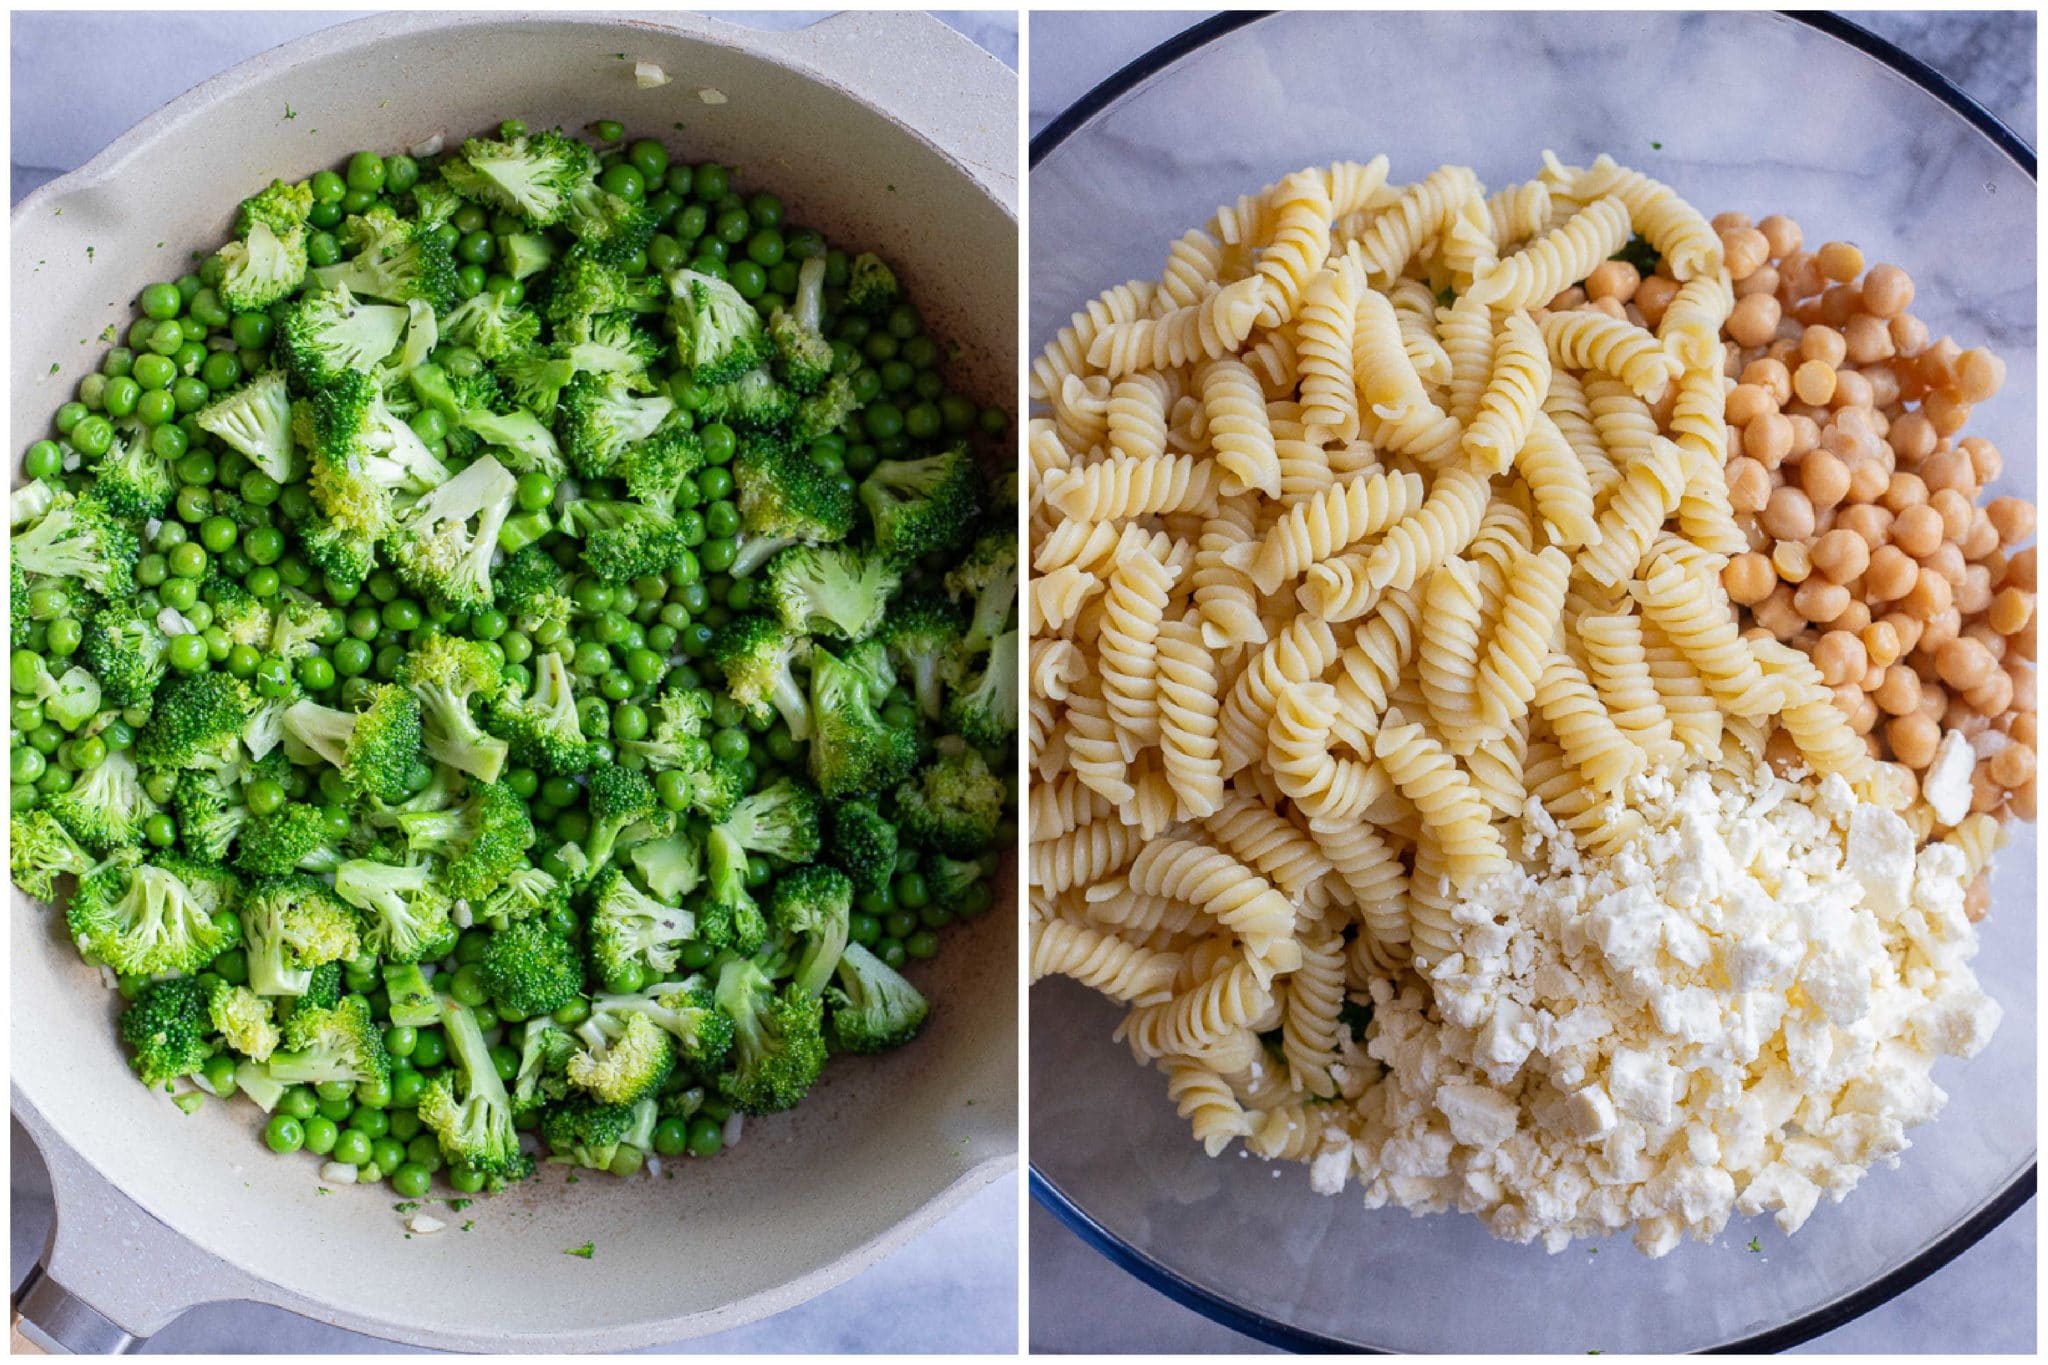 showing how to prepare the broccoli and peas and a bowl of cooked pasta, chickpeas and feta cheese